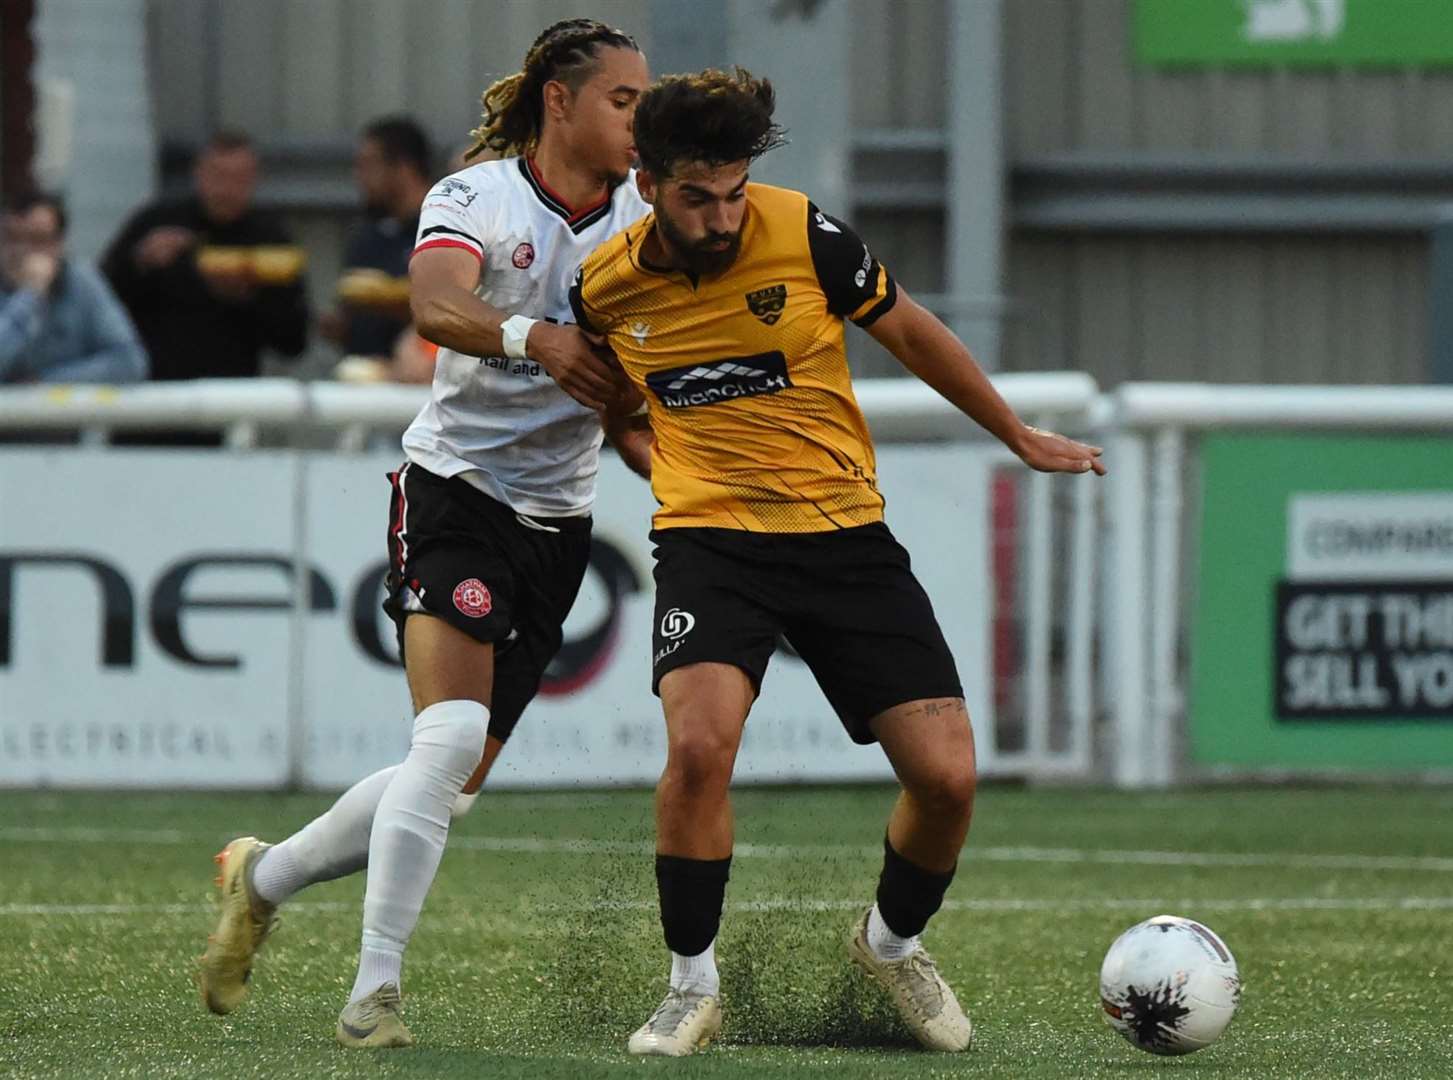 Chatham's Che Krabbendam, pictured in pre-season action at Maidstone, could face one of his former clubs this Saturday when they visit Cheshunt. Picture: Steve Terrell